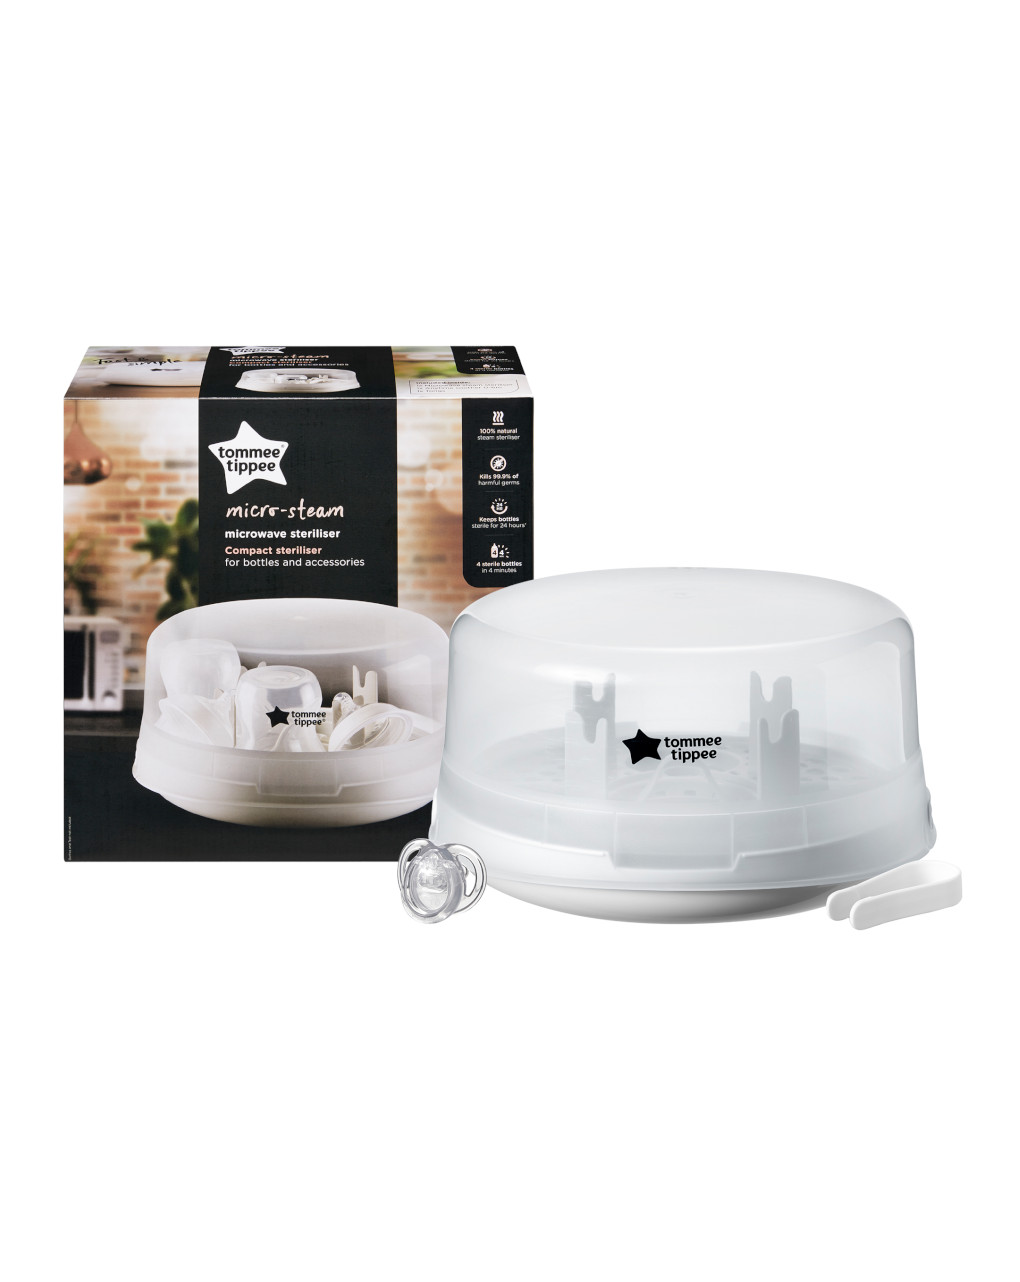 Sterilizzatore a microonde tommee tippee - Tommee Tippee